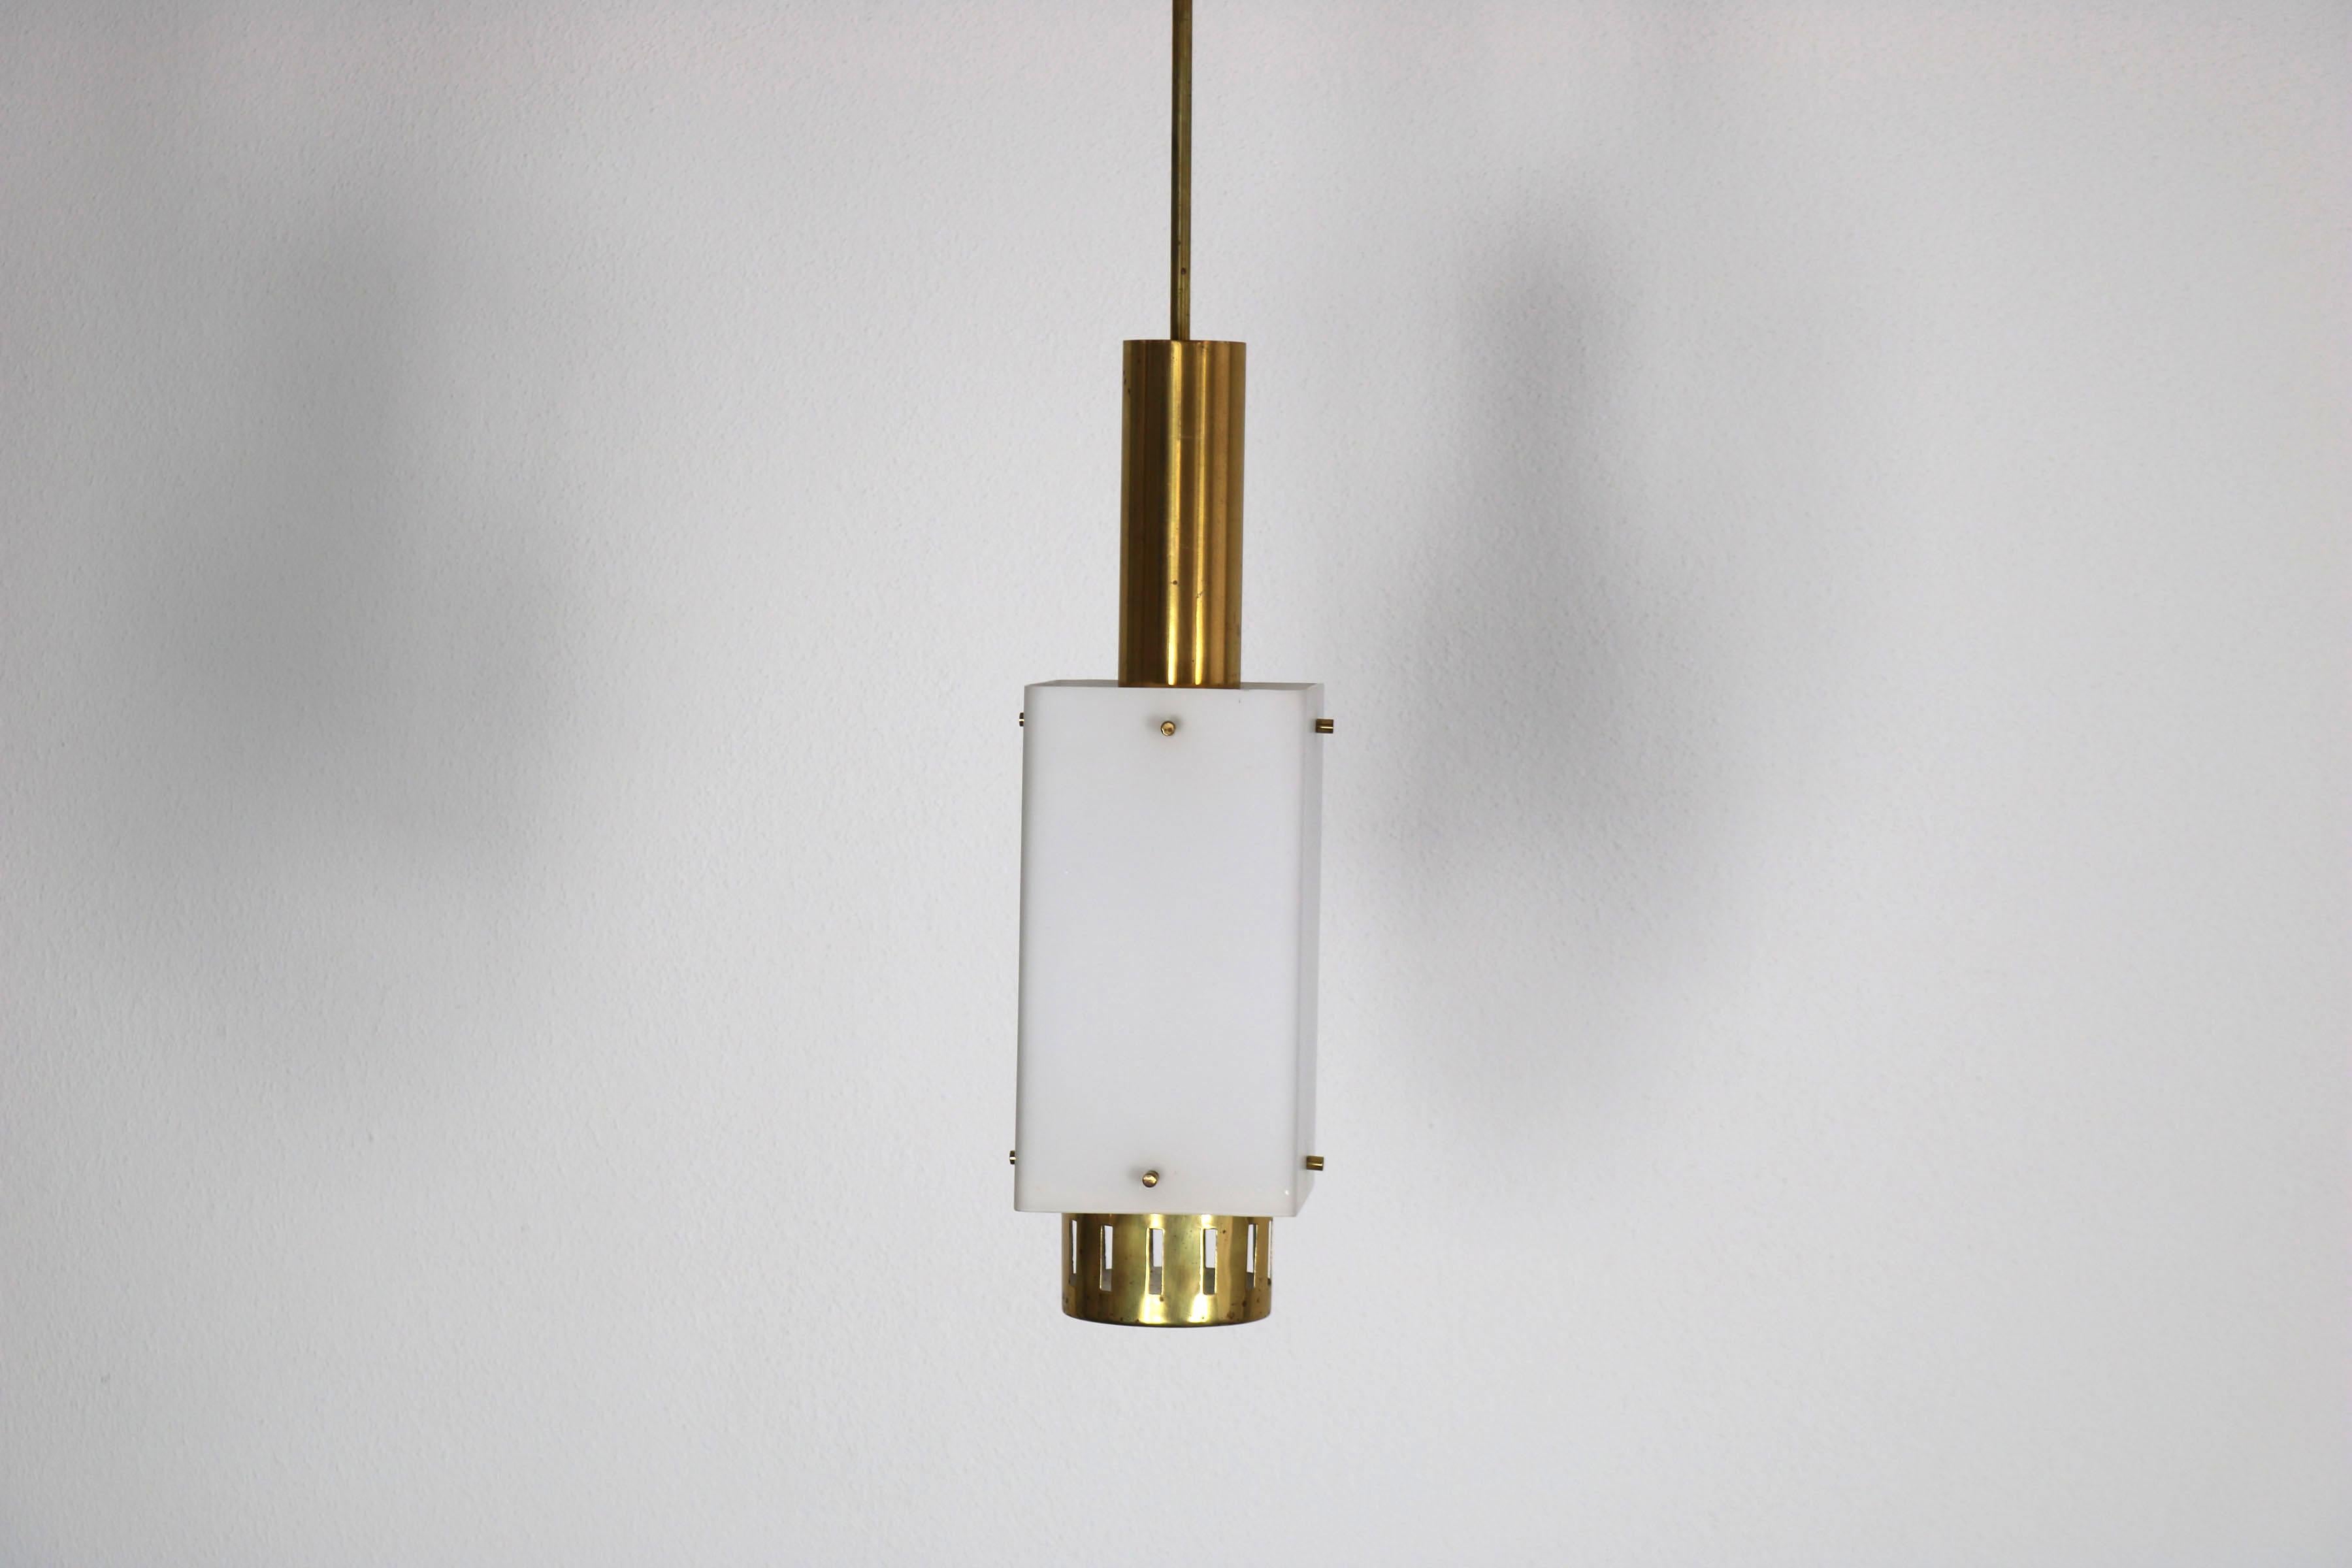 Stilnovo pendant lamp Italy, 1950s. The lamp has an opal glass shade and brass elements.

Feel free to ask for more information.

